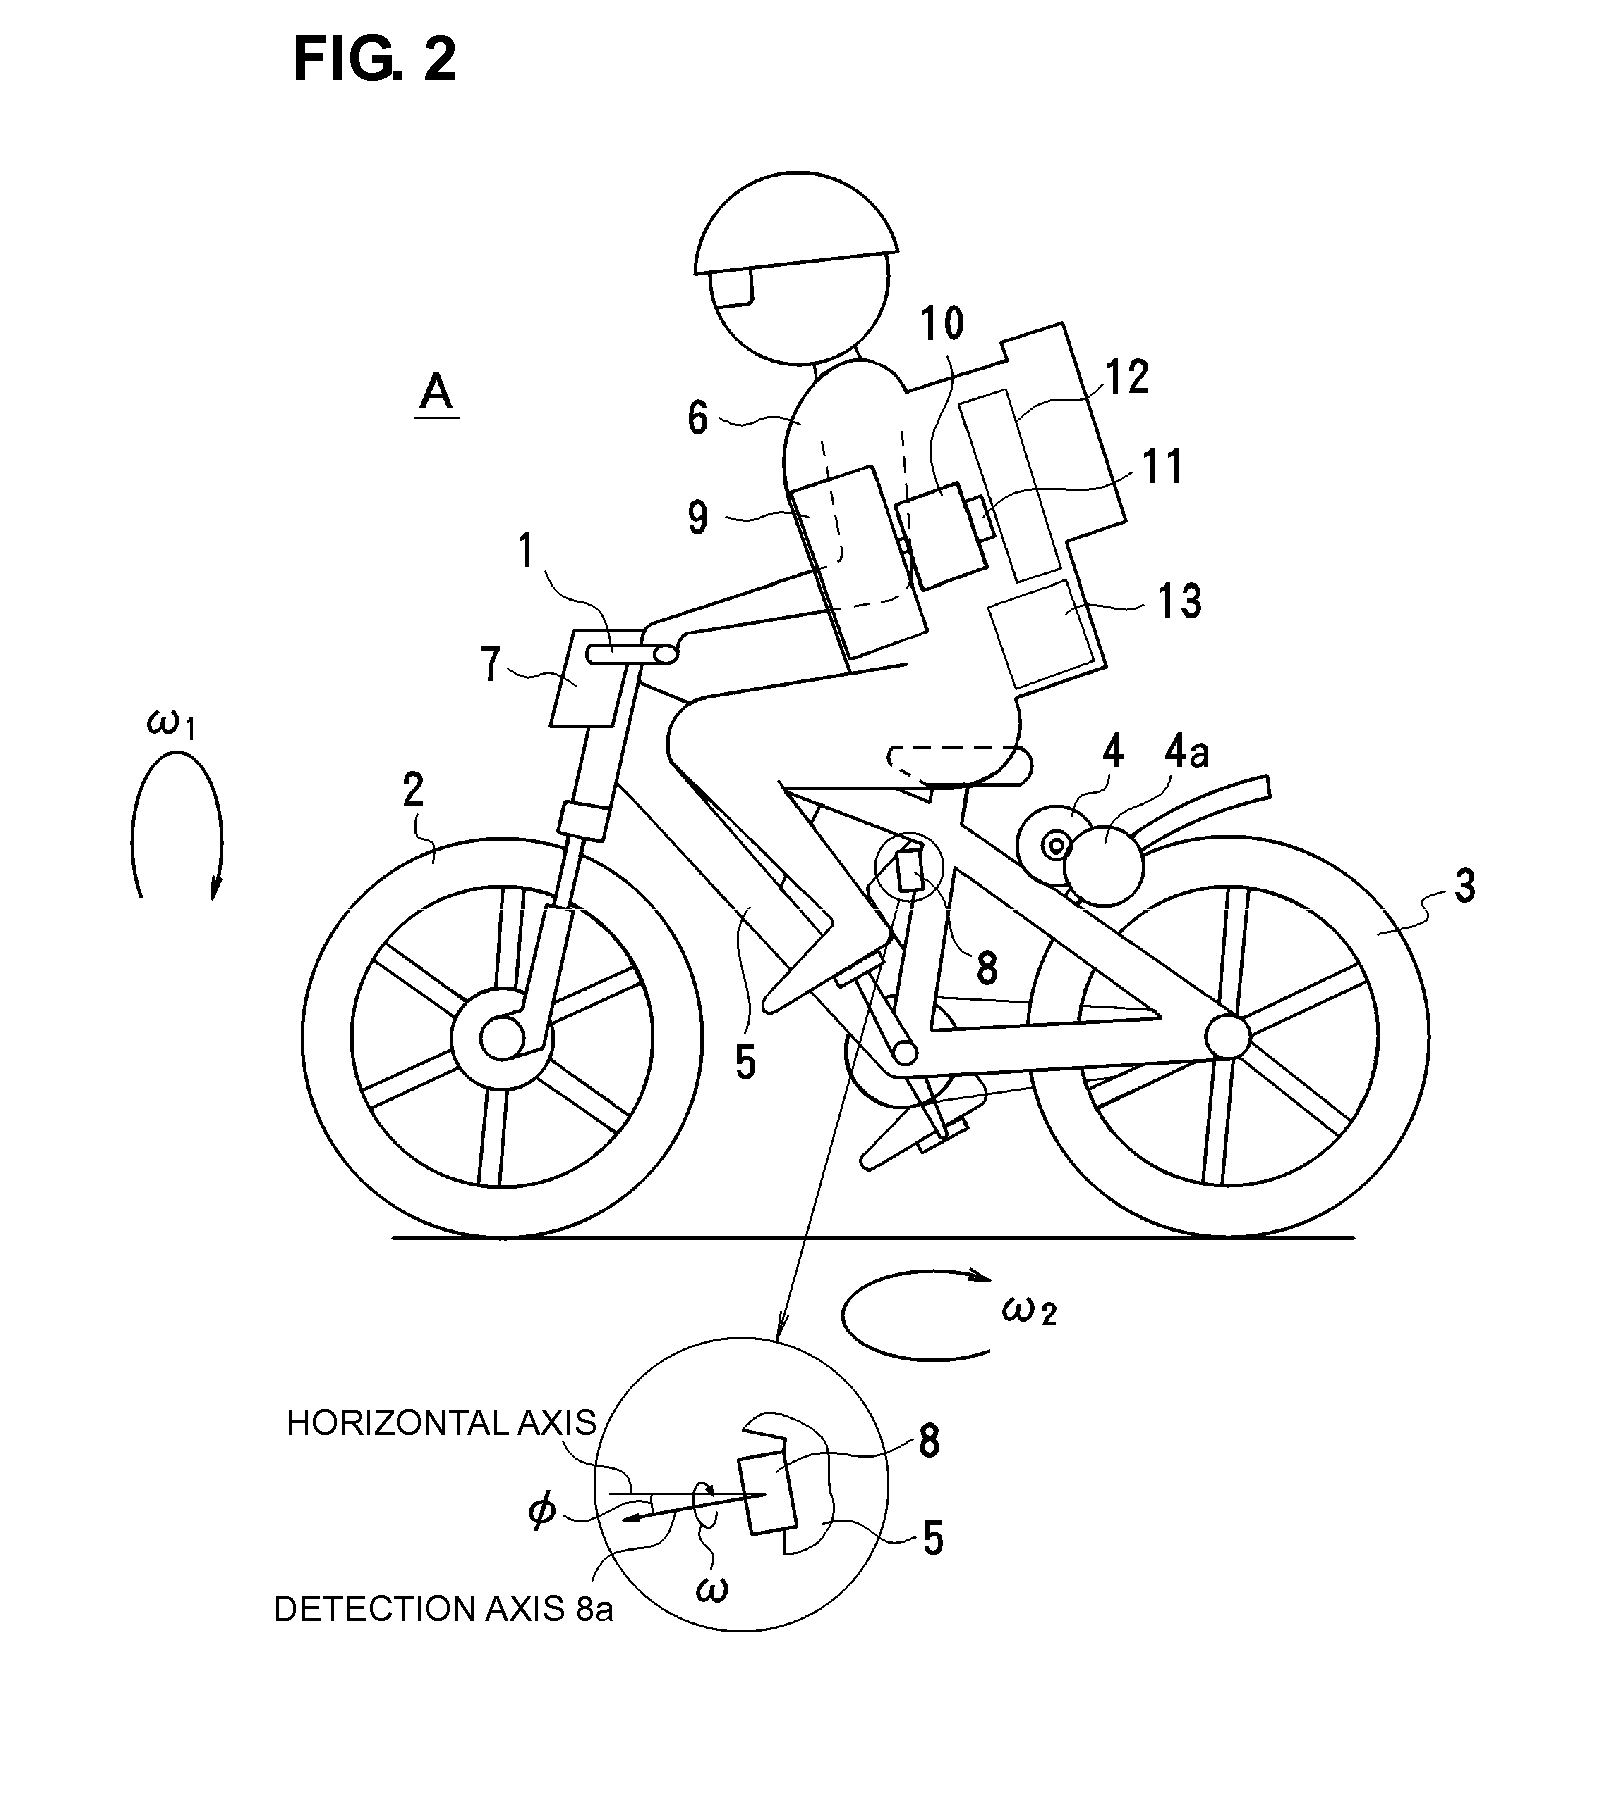 Overturn prevention control device for two-wheel vehicle